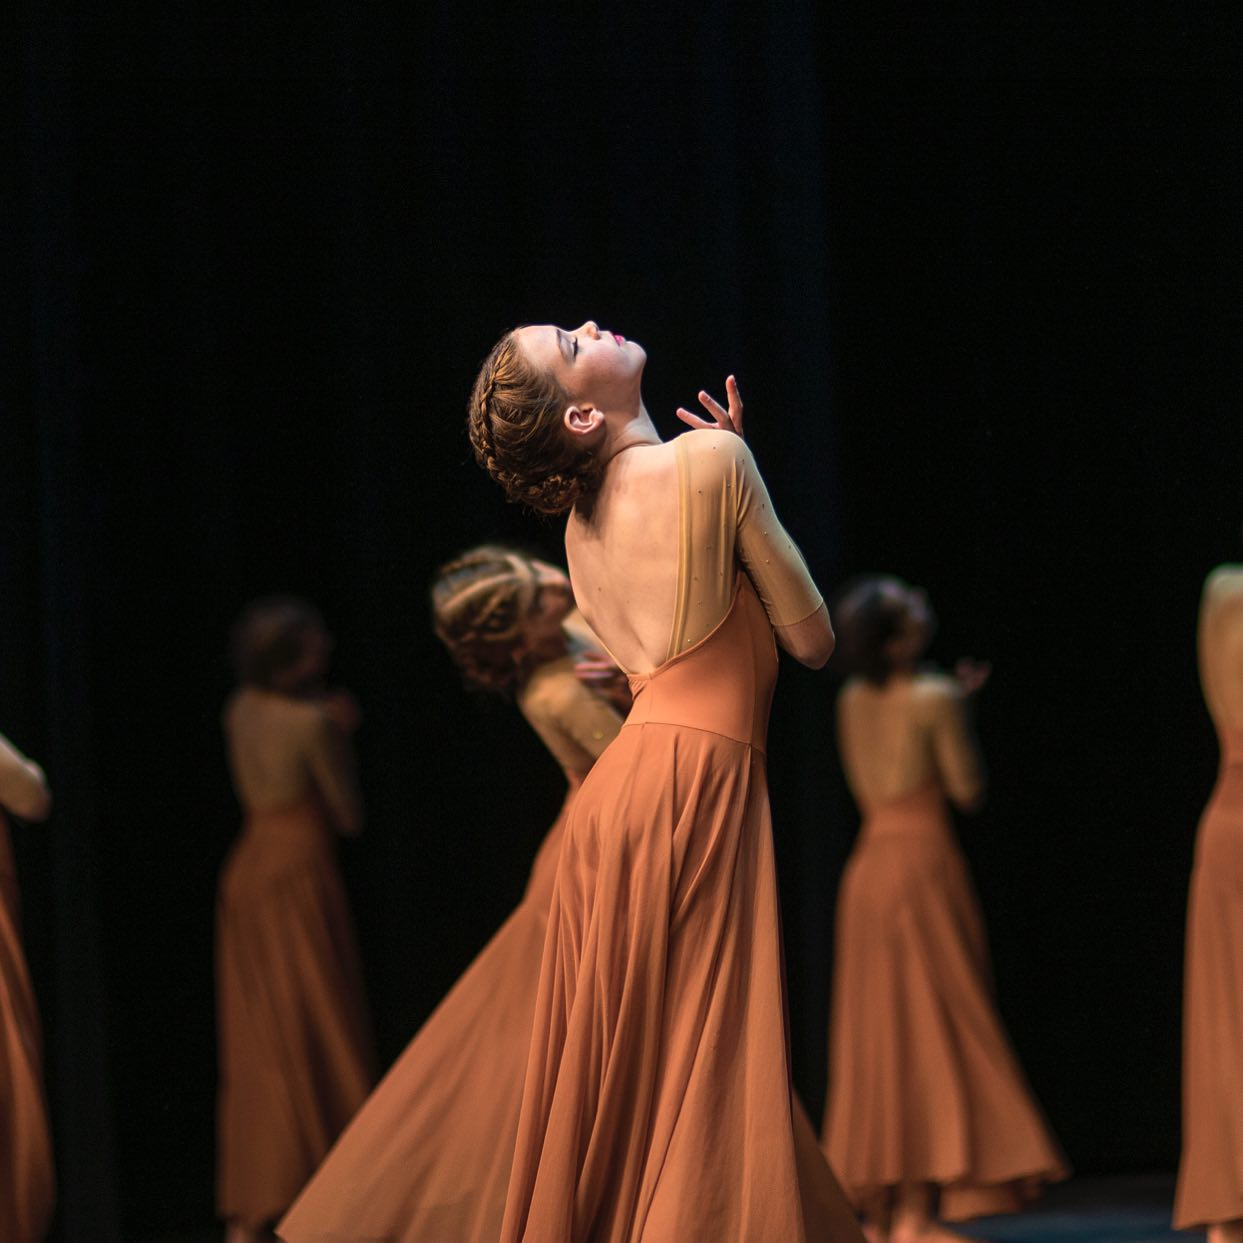 Members of the Design Dance Studio Teen Company of Traverse City, Michigan perform at their annual spring performance Bloom. Photo by Michael Poehlman.